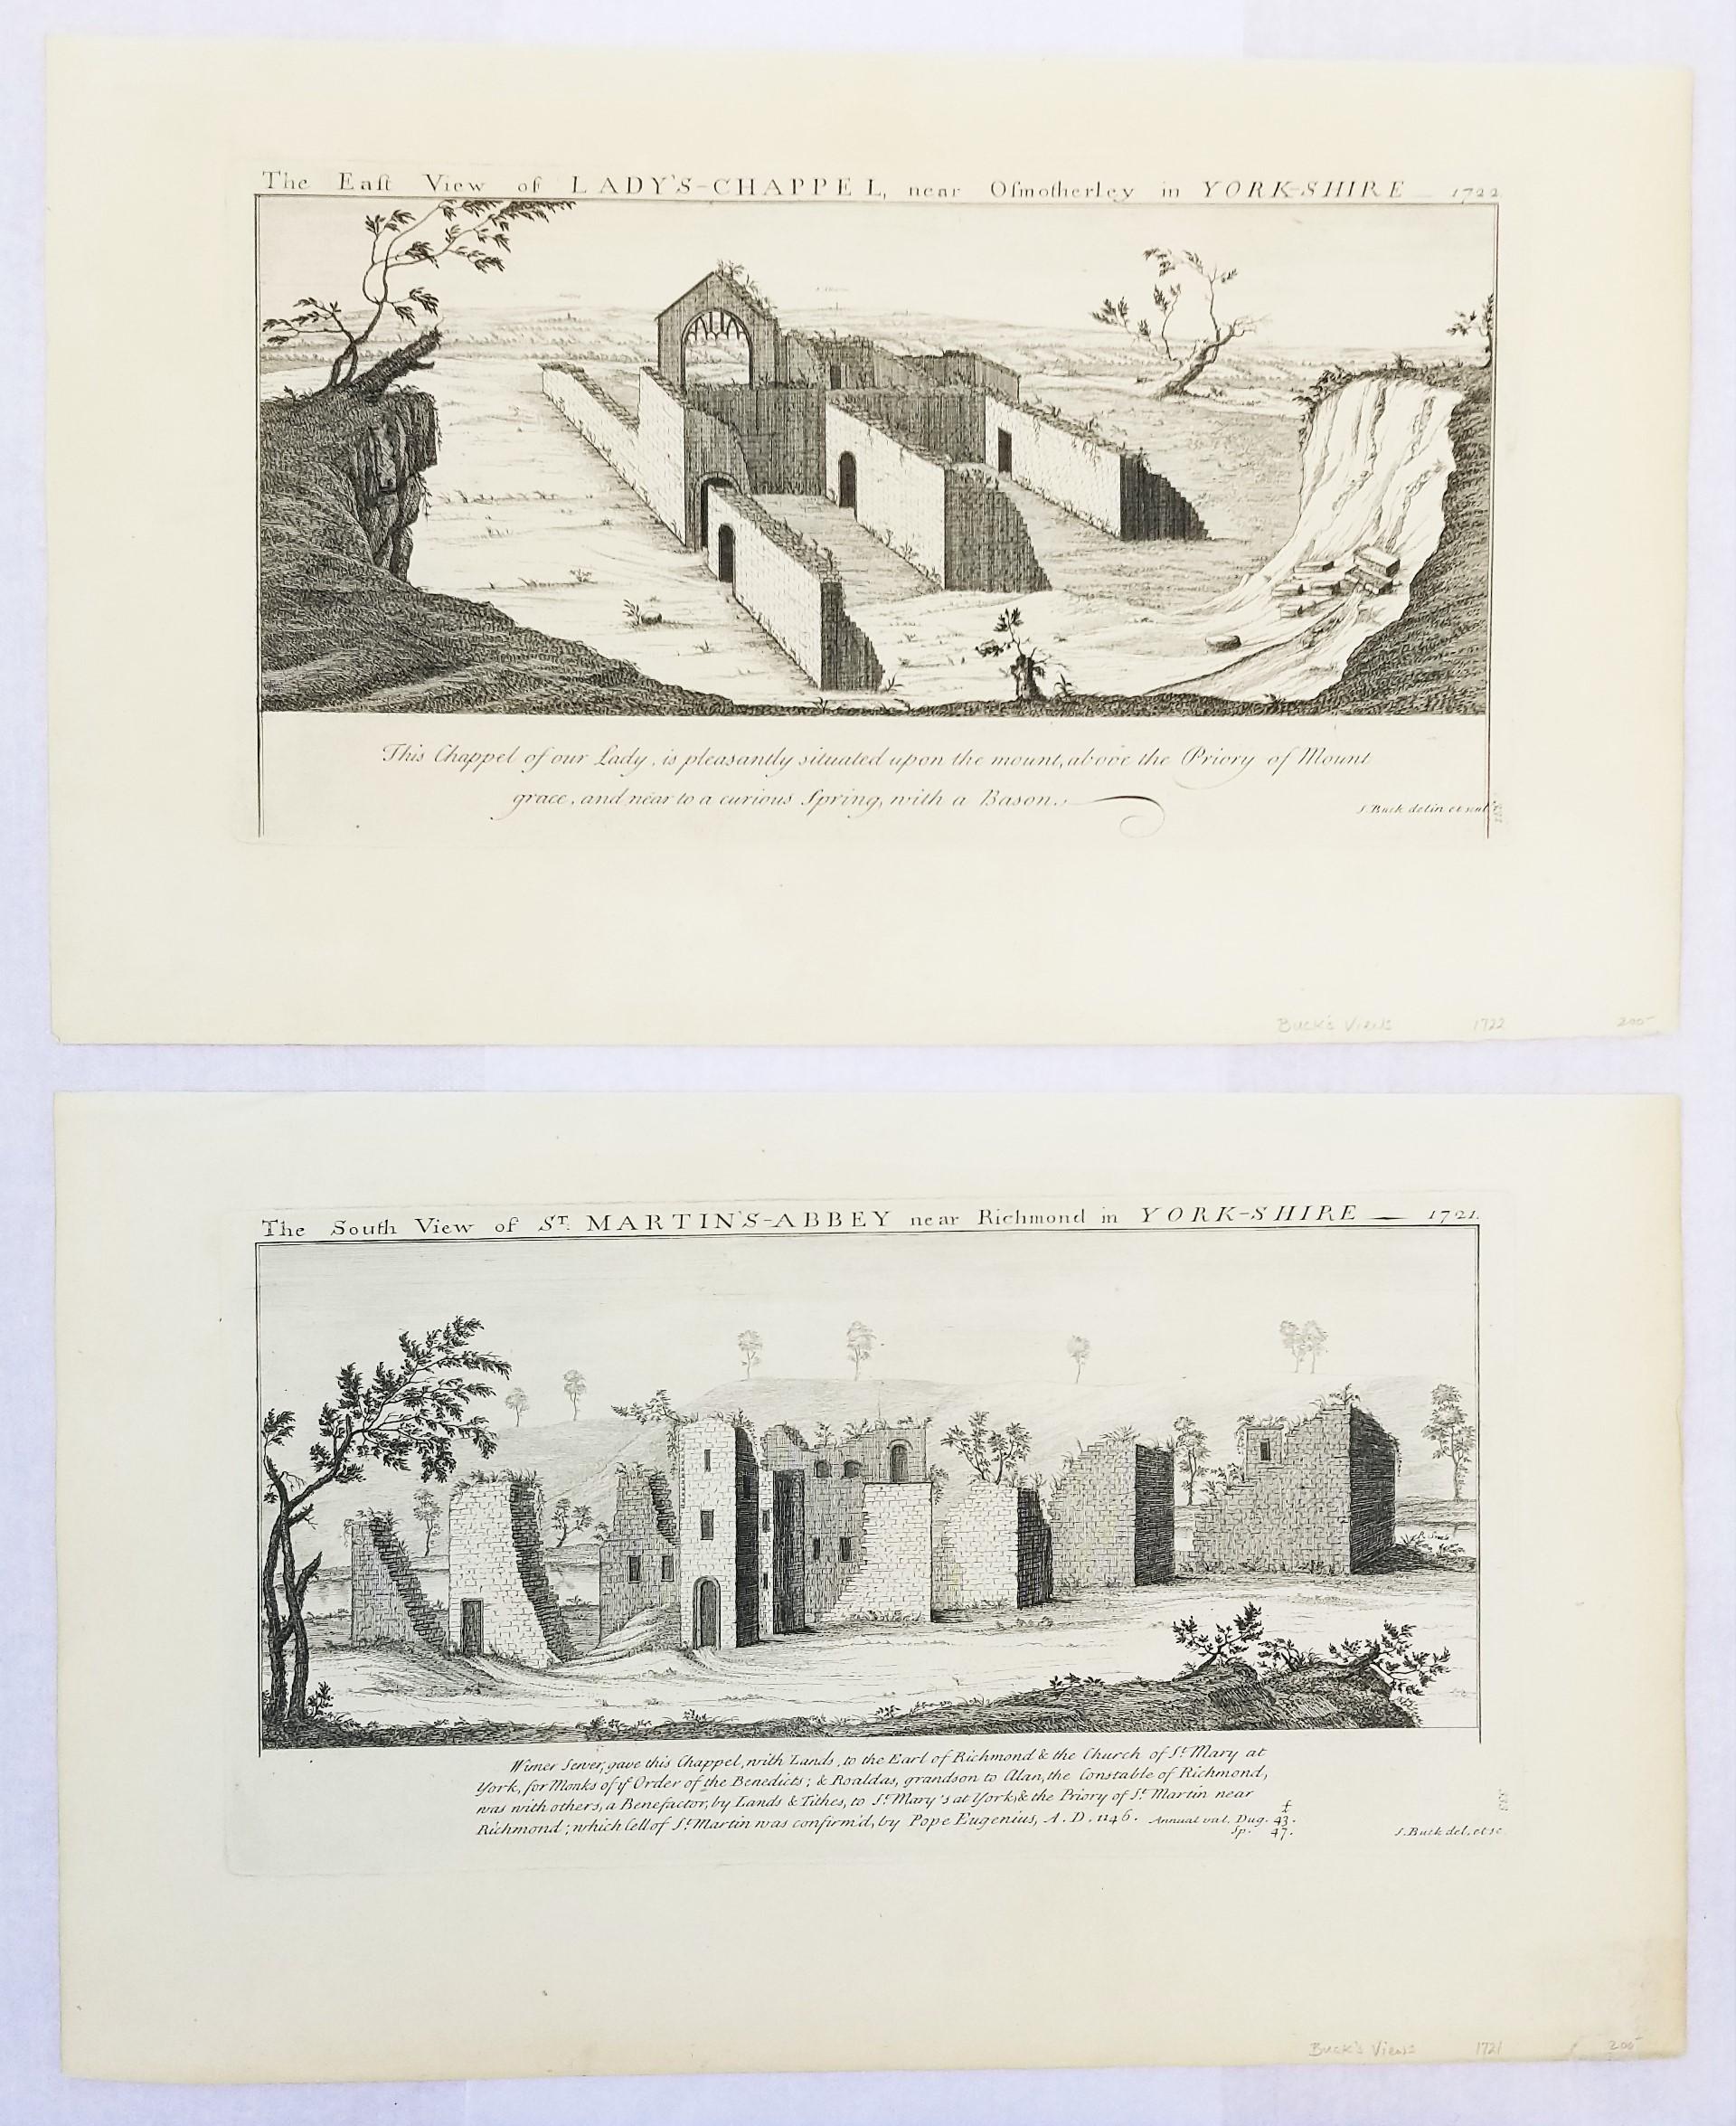 "St. Martin's Abbey" and "Lady's Chappel" from "Buck's Antiquities" /// British